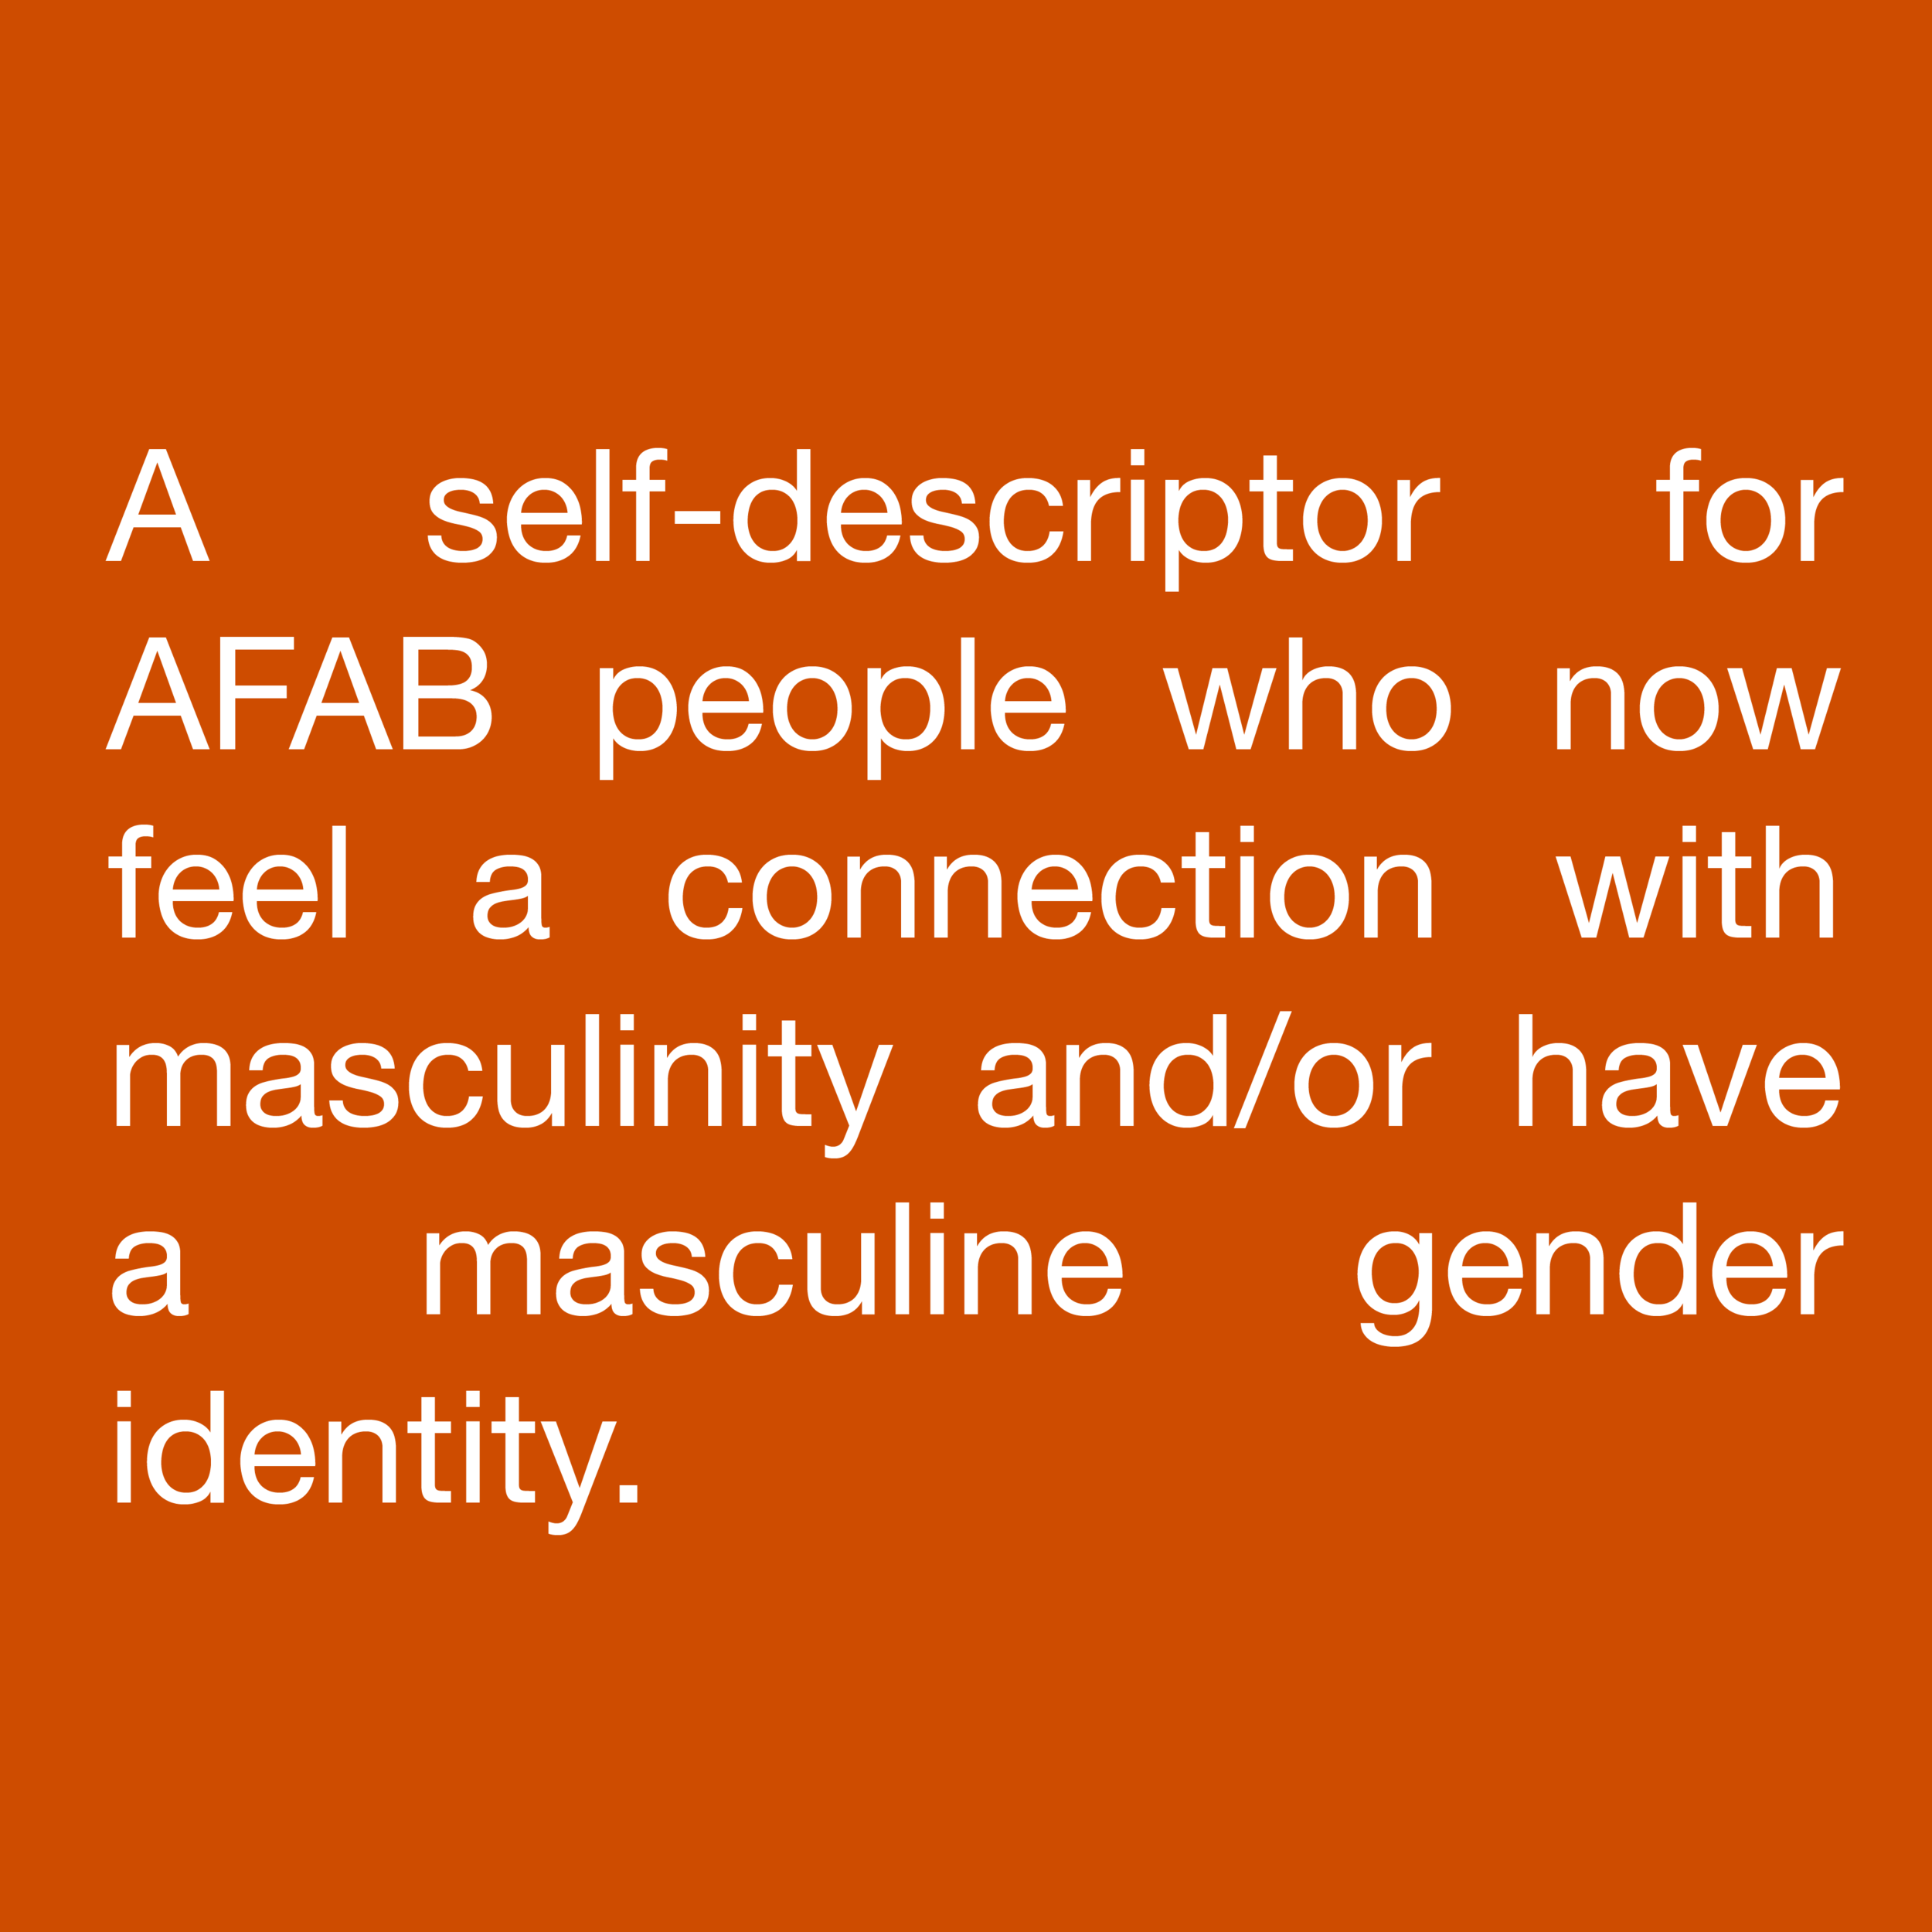  A self-descriptor for AFAB people who now feel a connection with masculinity and/or have a masculine gender identity. 